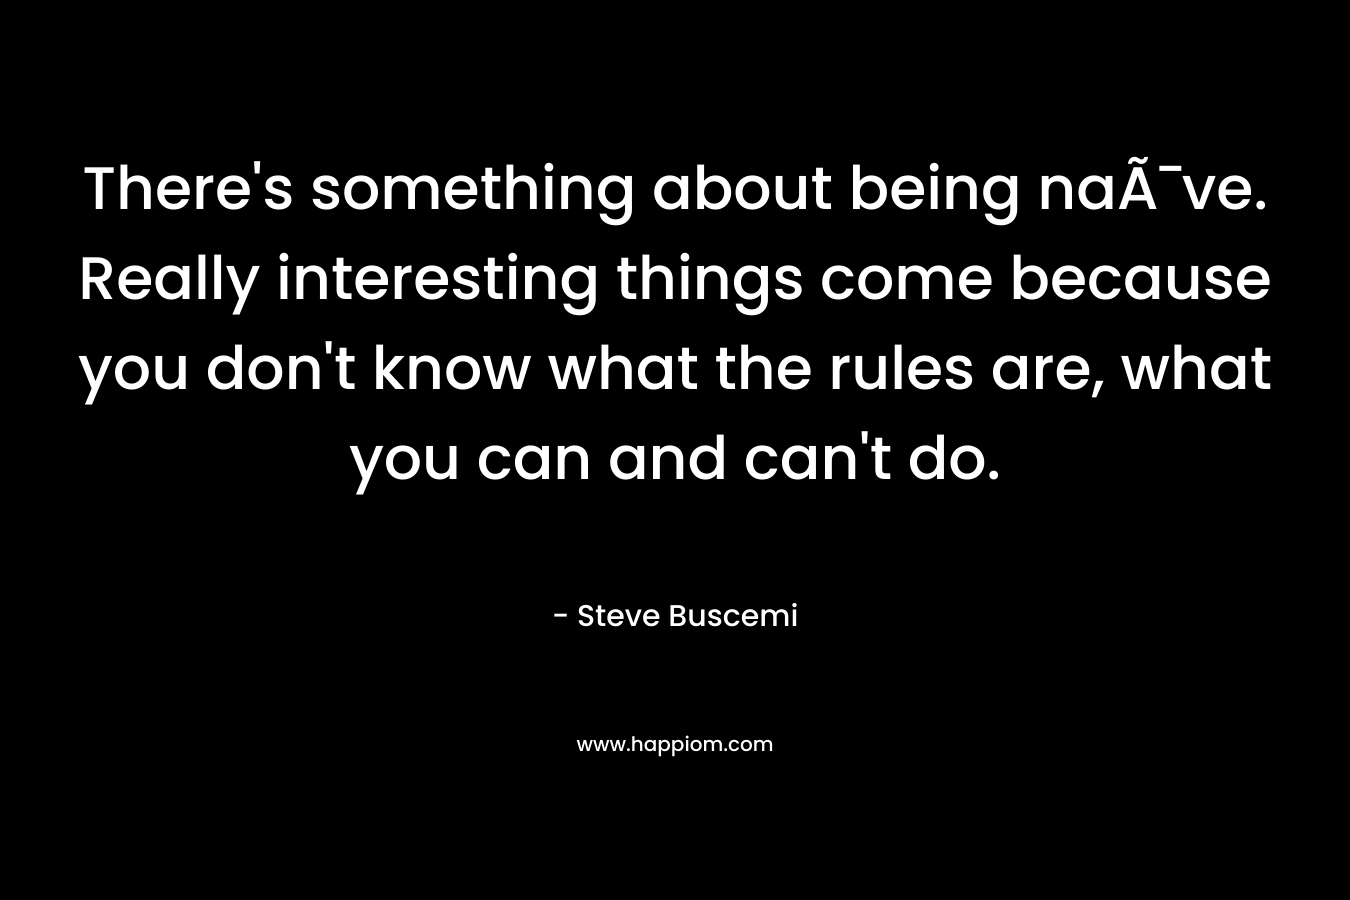 There’s something about being naÃ¯ve. Really interesting things come because you don’t know what the rules are, what you can and can’t do. – Steve Buscemi